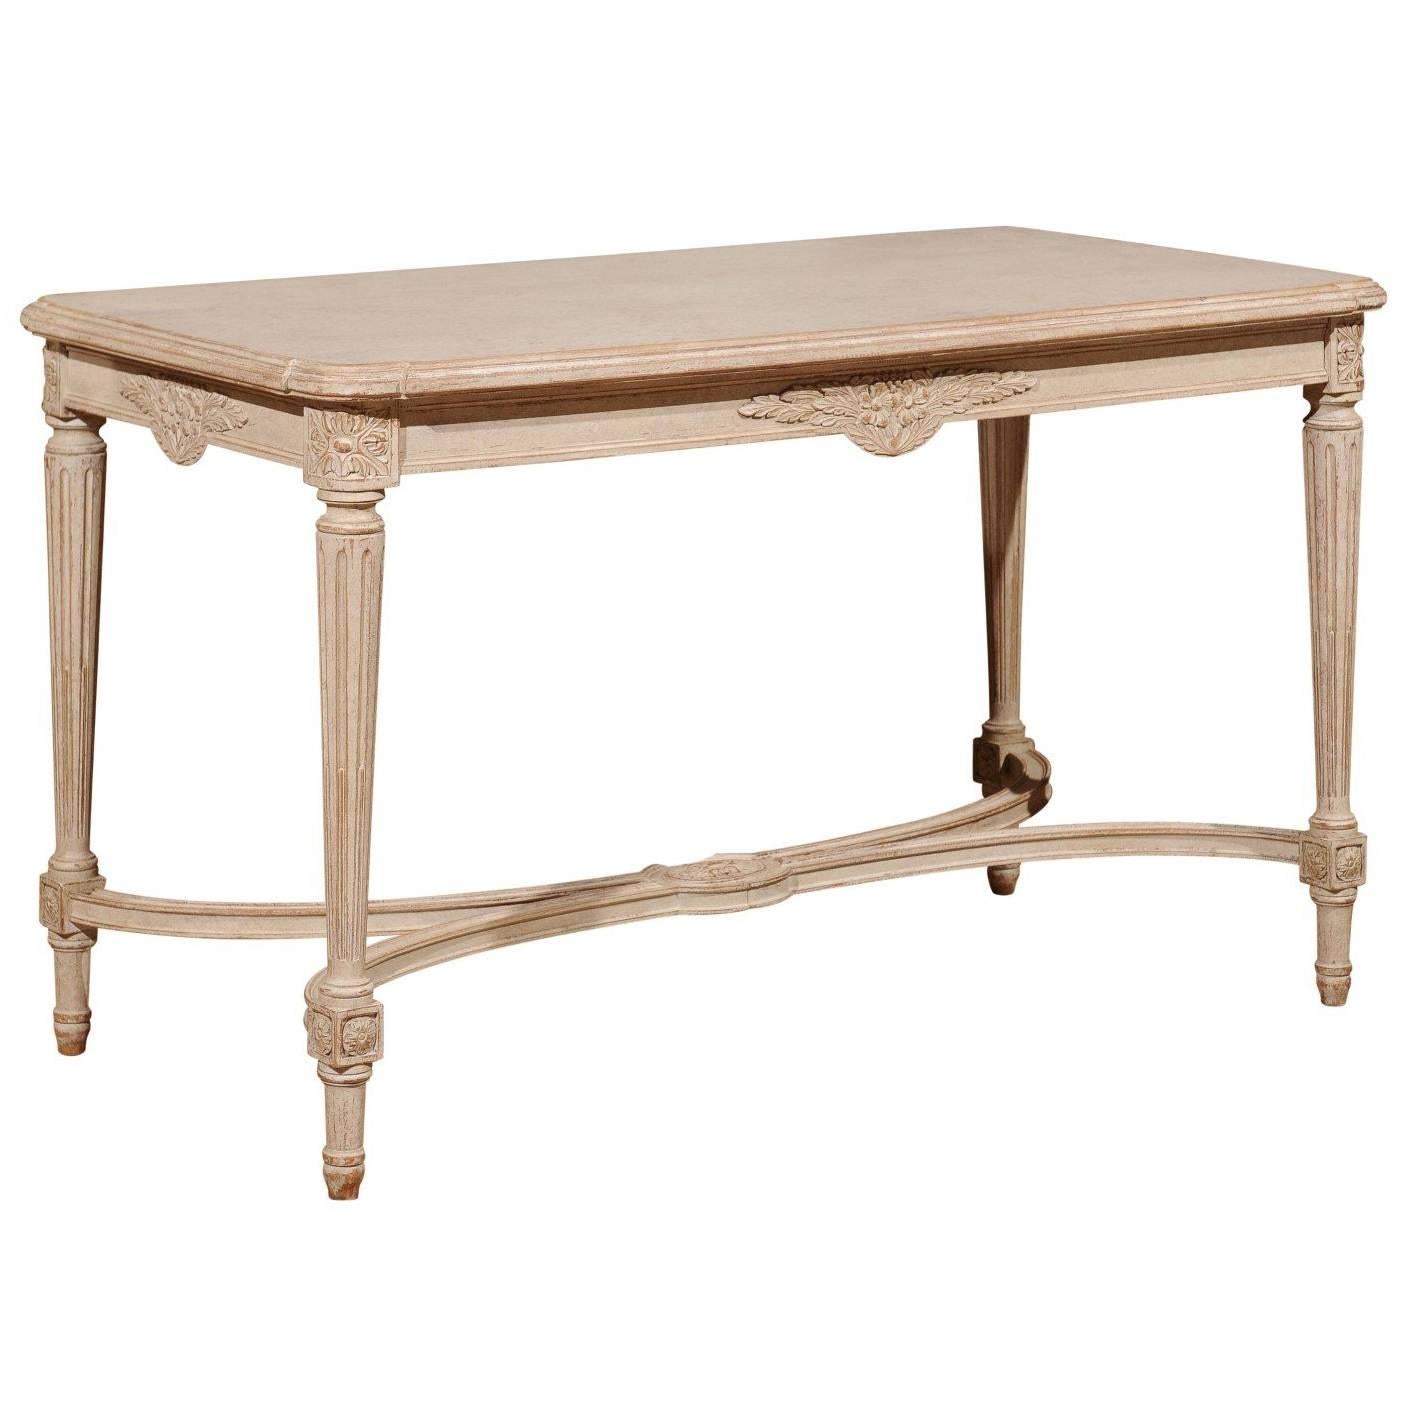 Swedish Gustavian Style Painted Wood Tea Table with Fluted Legs, circa 1920 For Sale